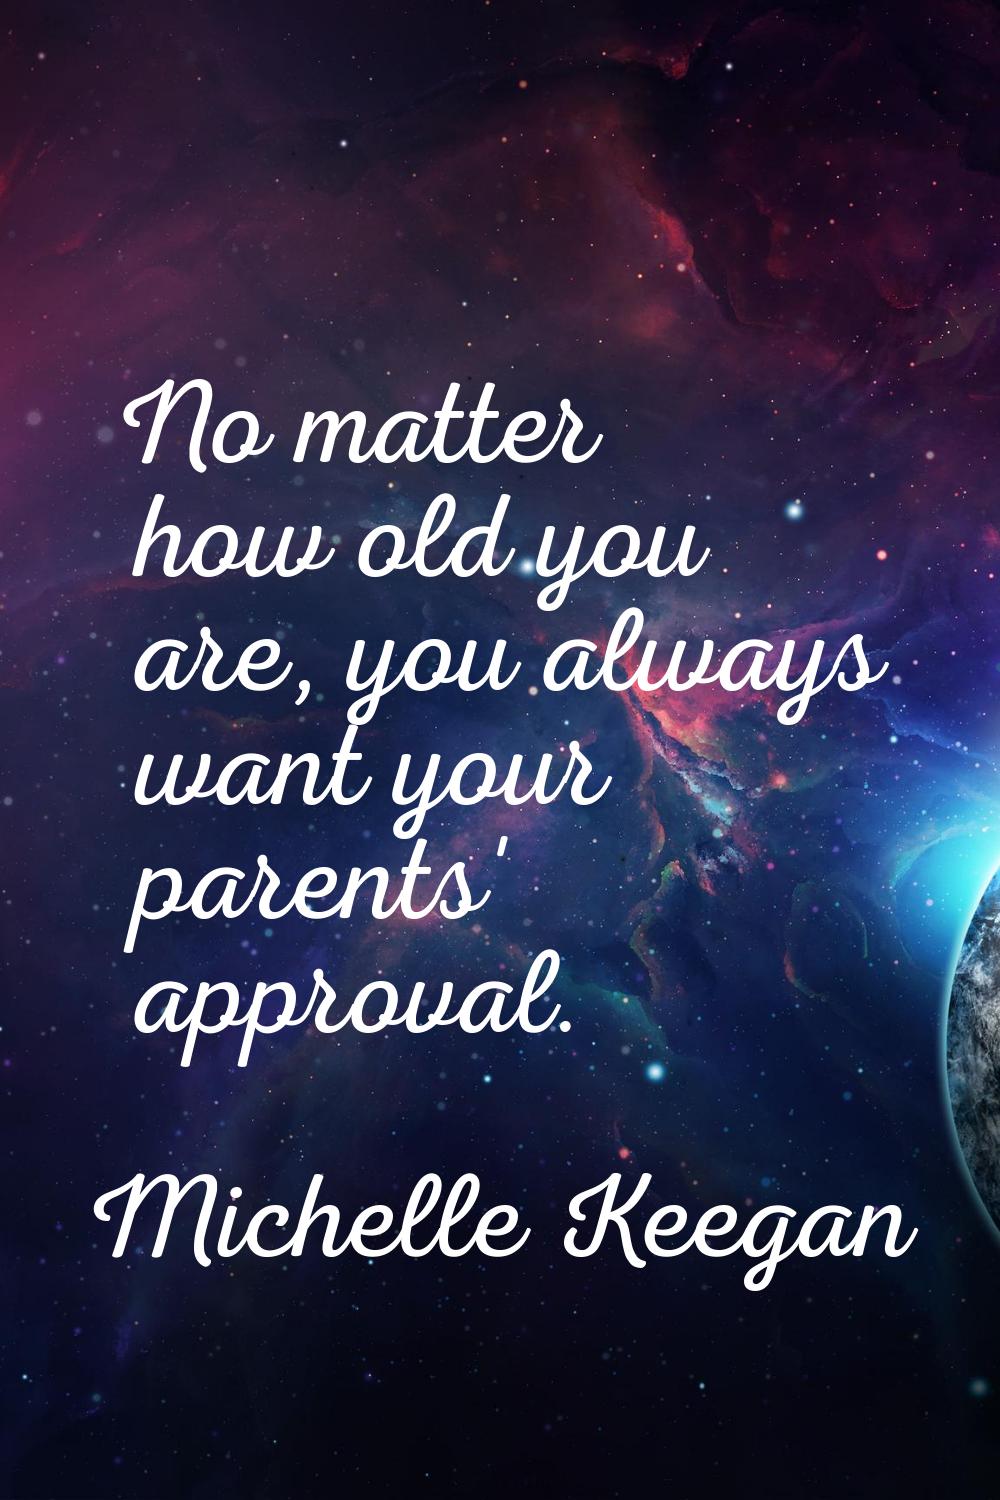 No matter how old you are, you always want your parents' approval.